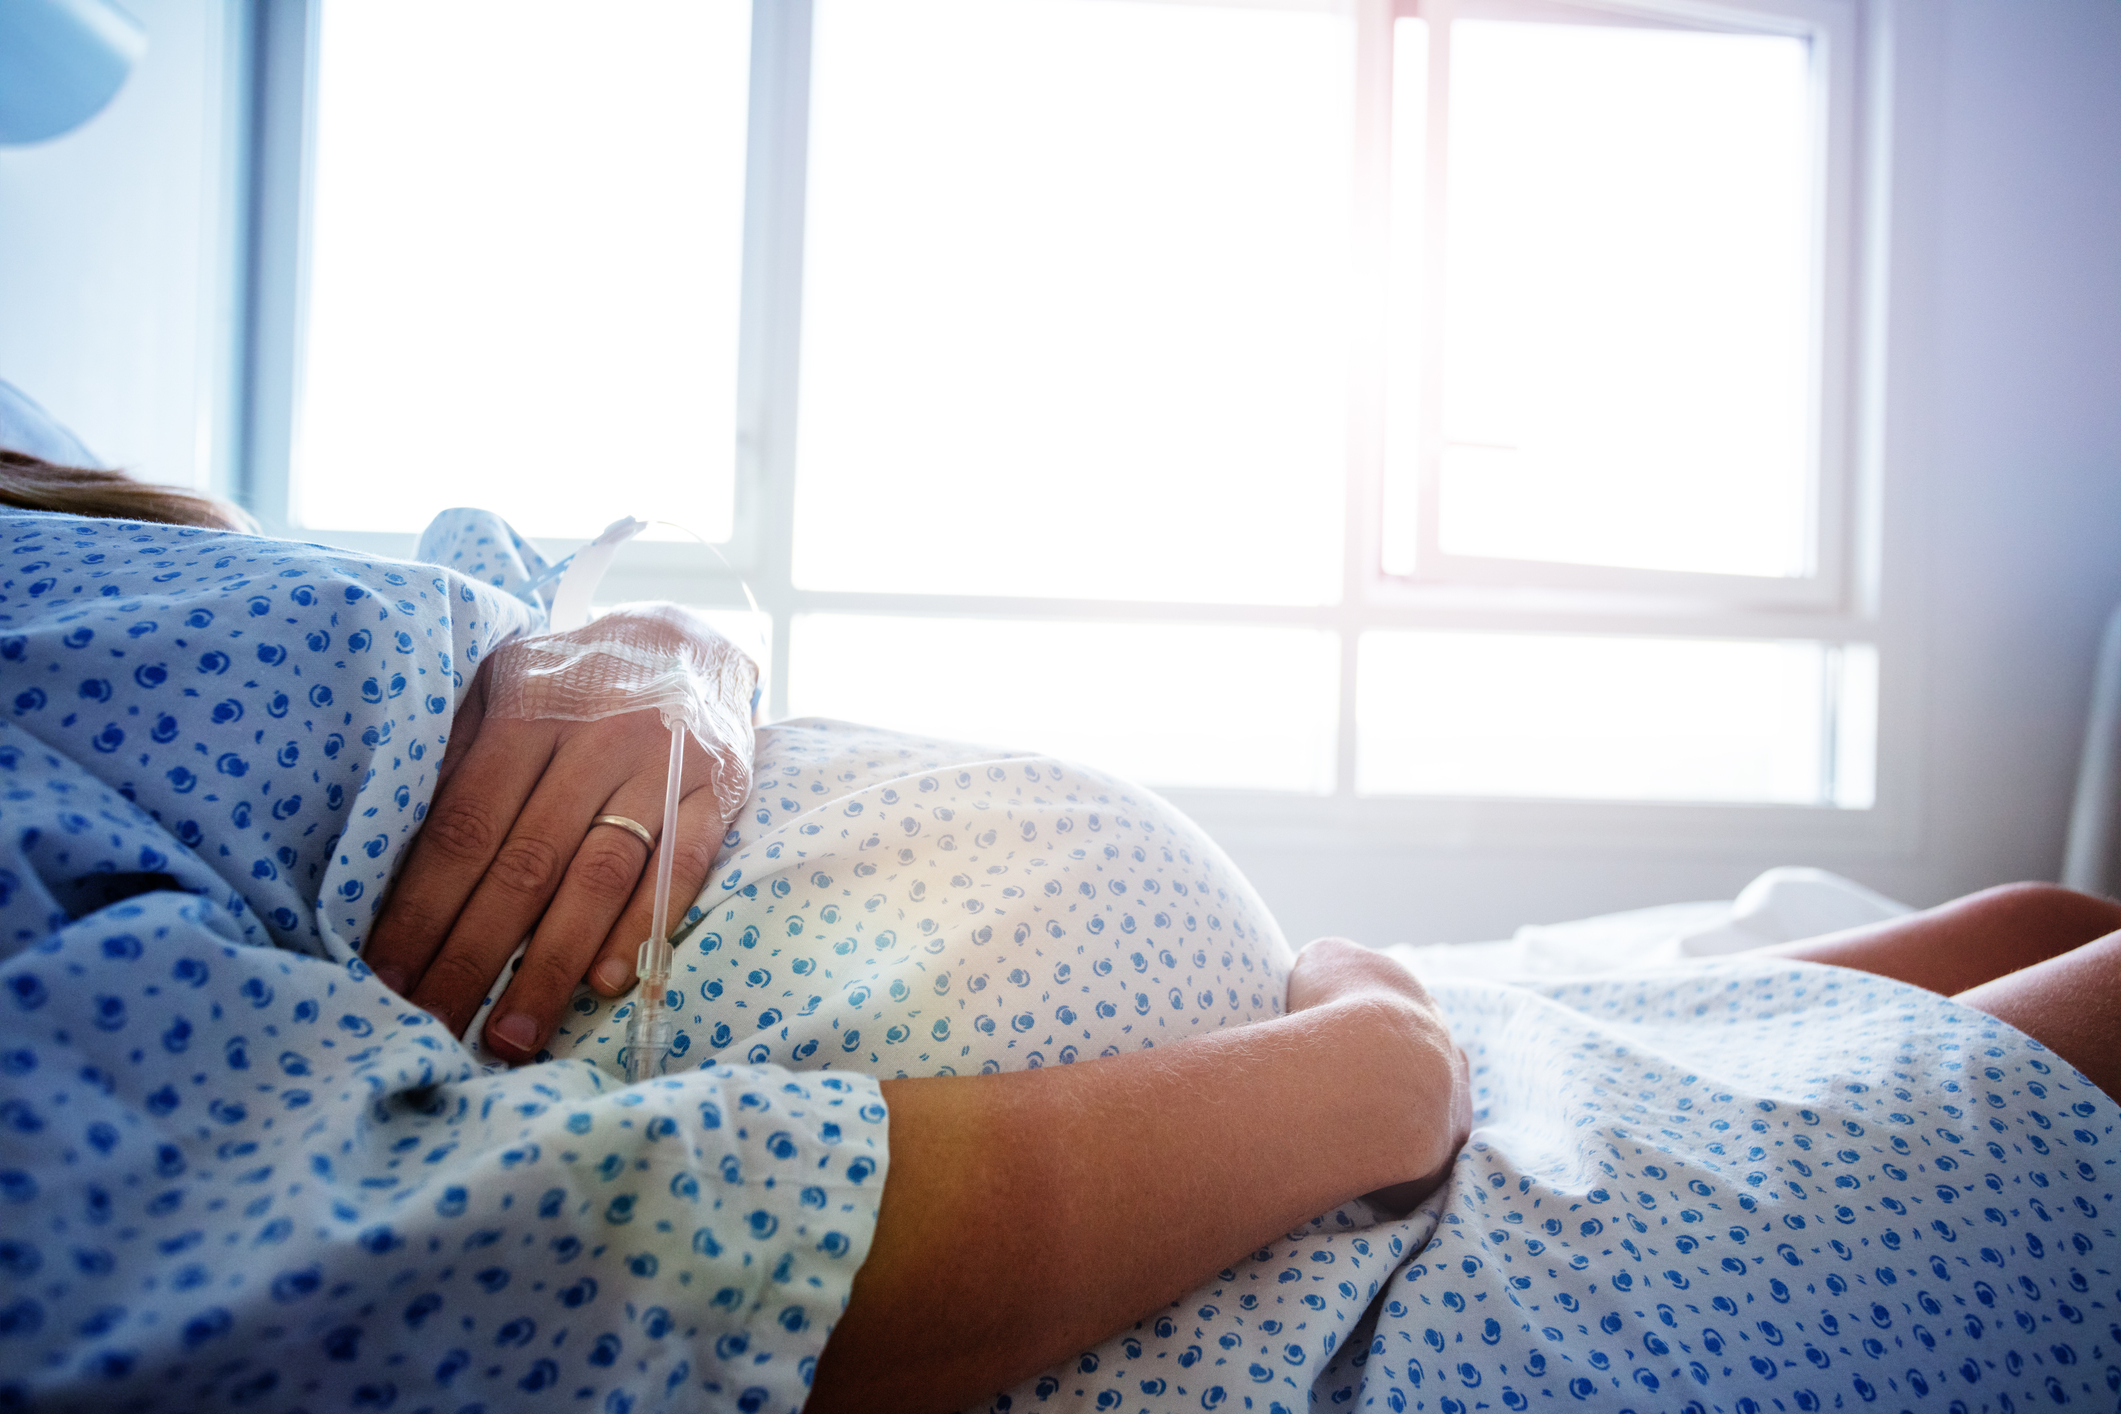 A pregnant woman lying in a hospital bed, wearing a gown, with hands resting on her belly